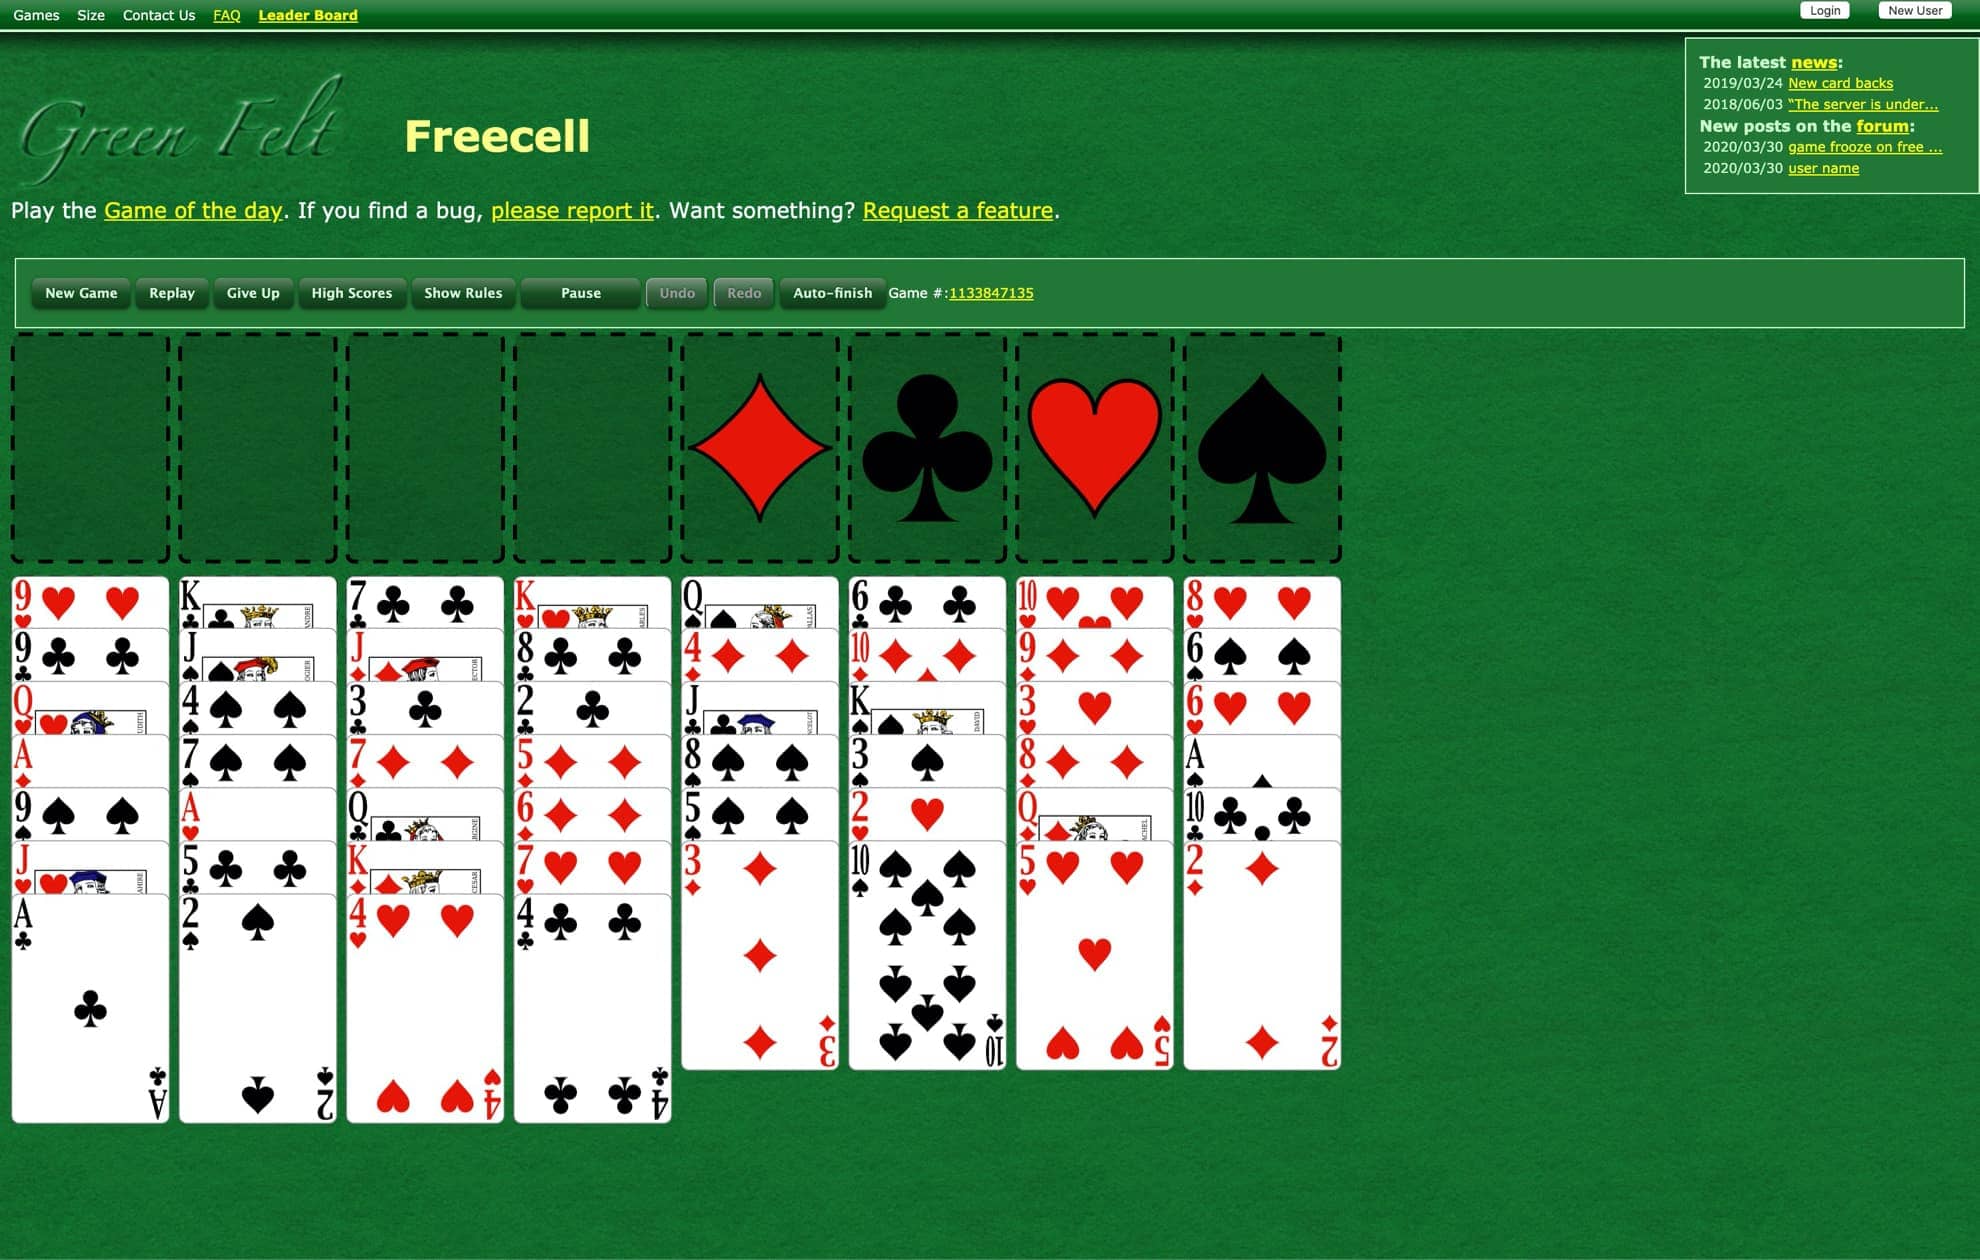 freecell solitaire green felt security issue